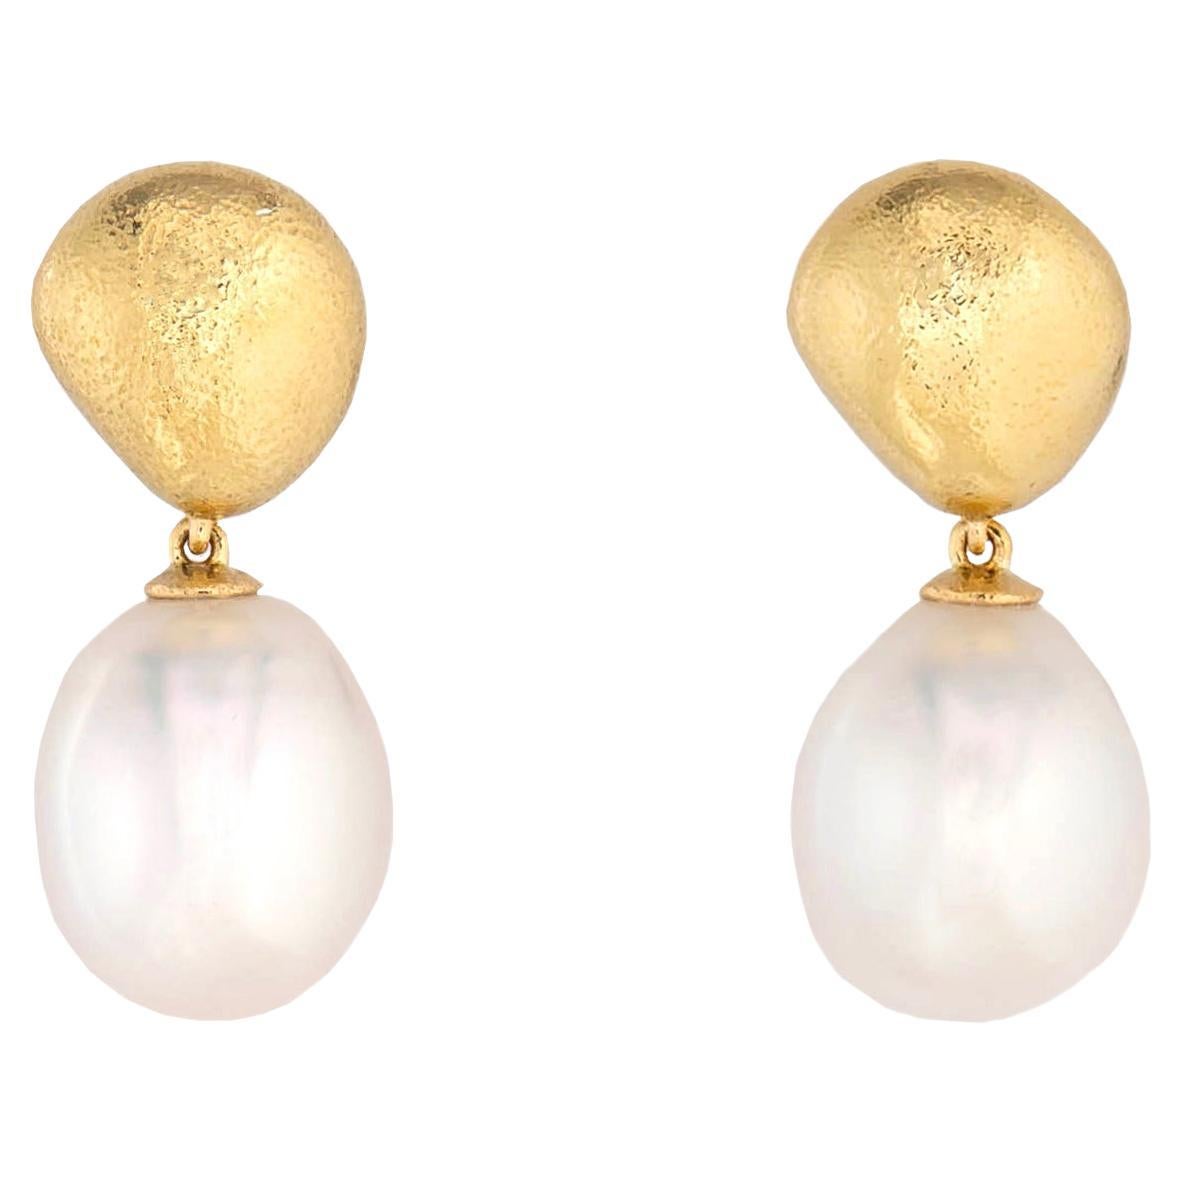 Tiffany & Co. Gold and South Sea Pearl Drop Earrings